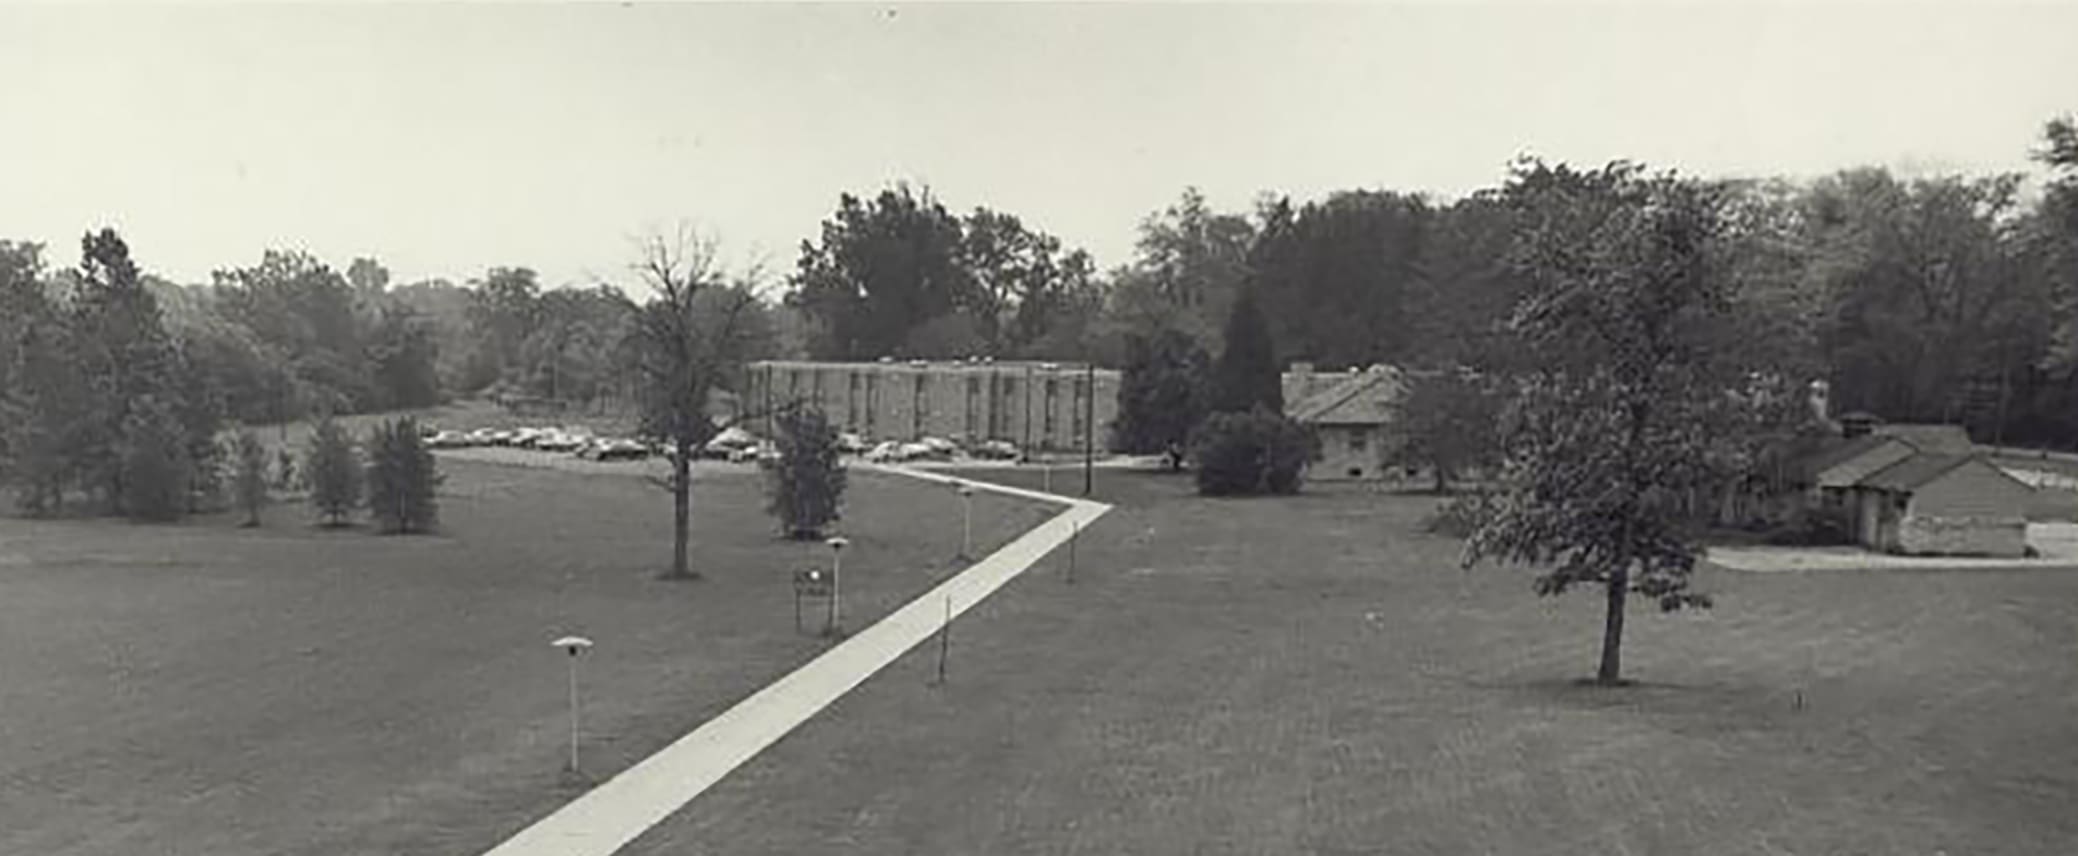 UM-Dearborn student housing and cottages, 1971